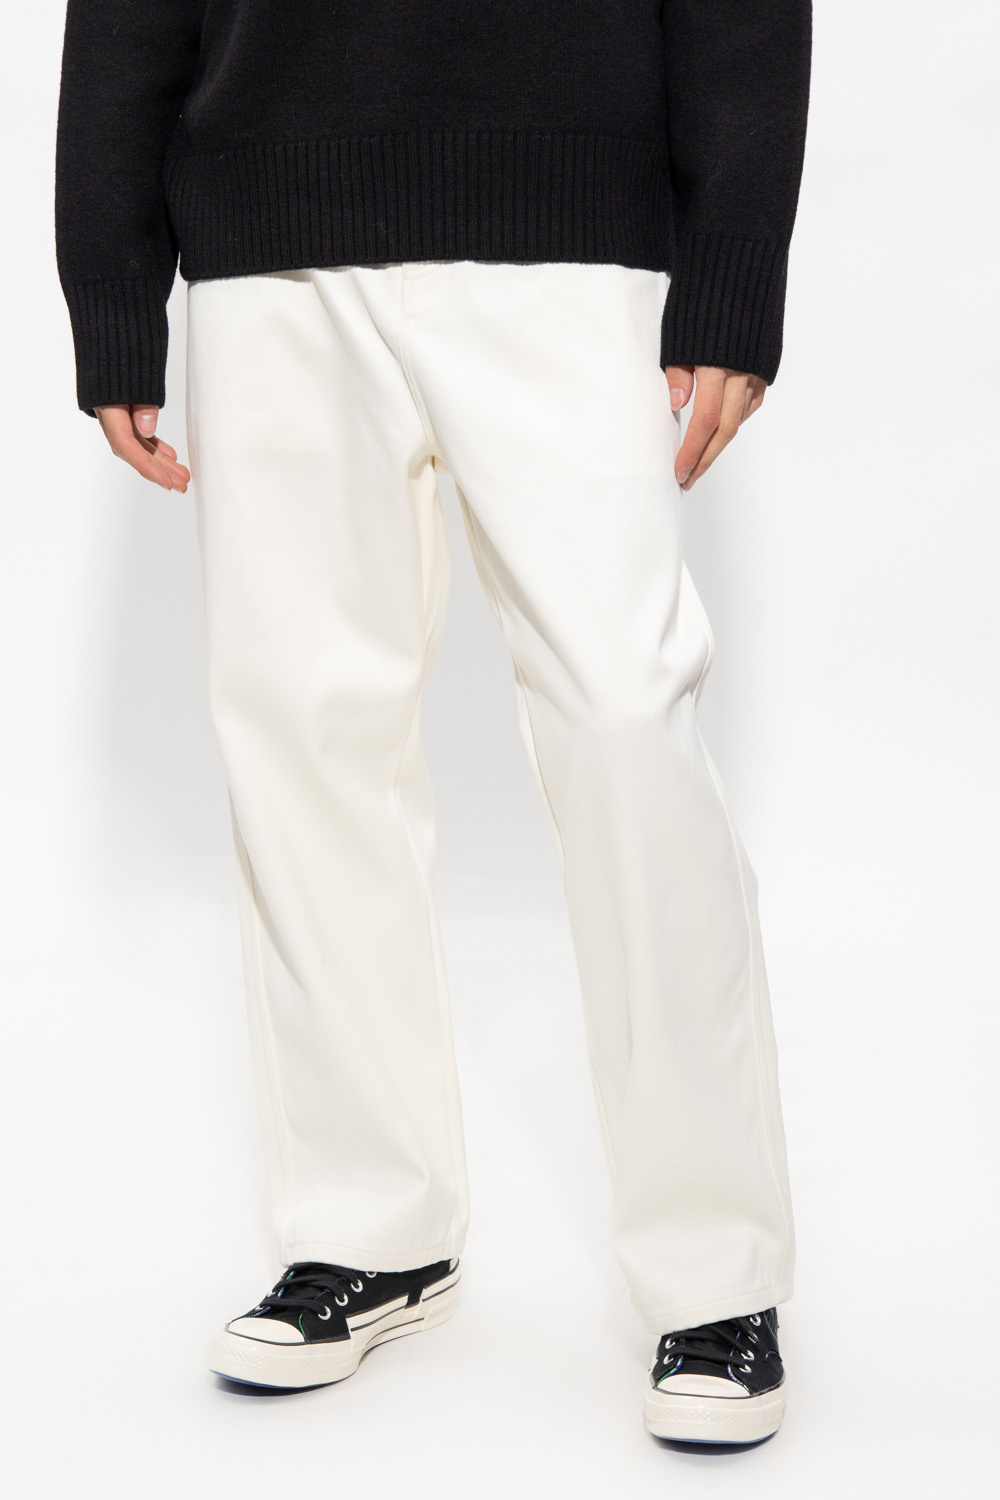 Sarrouel Long-rib pants Jeans with dropped crotch